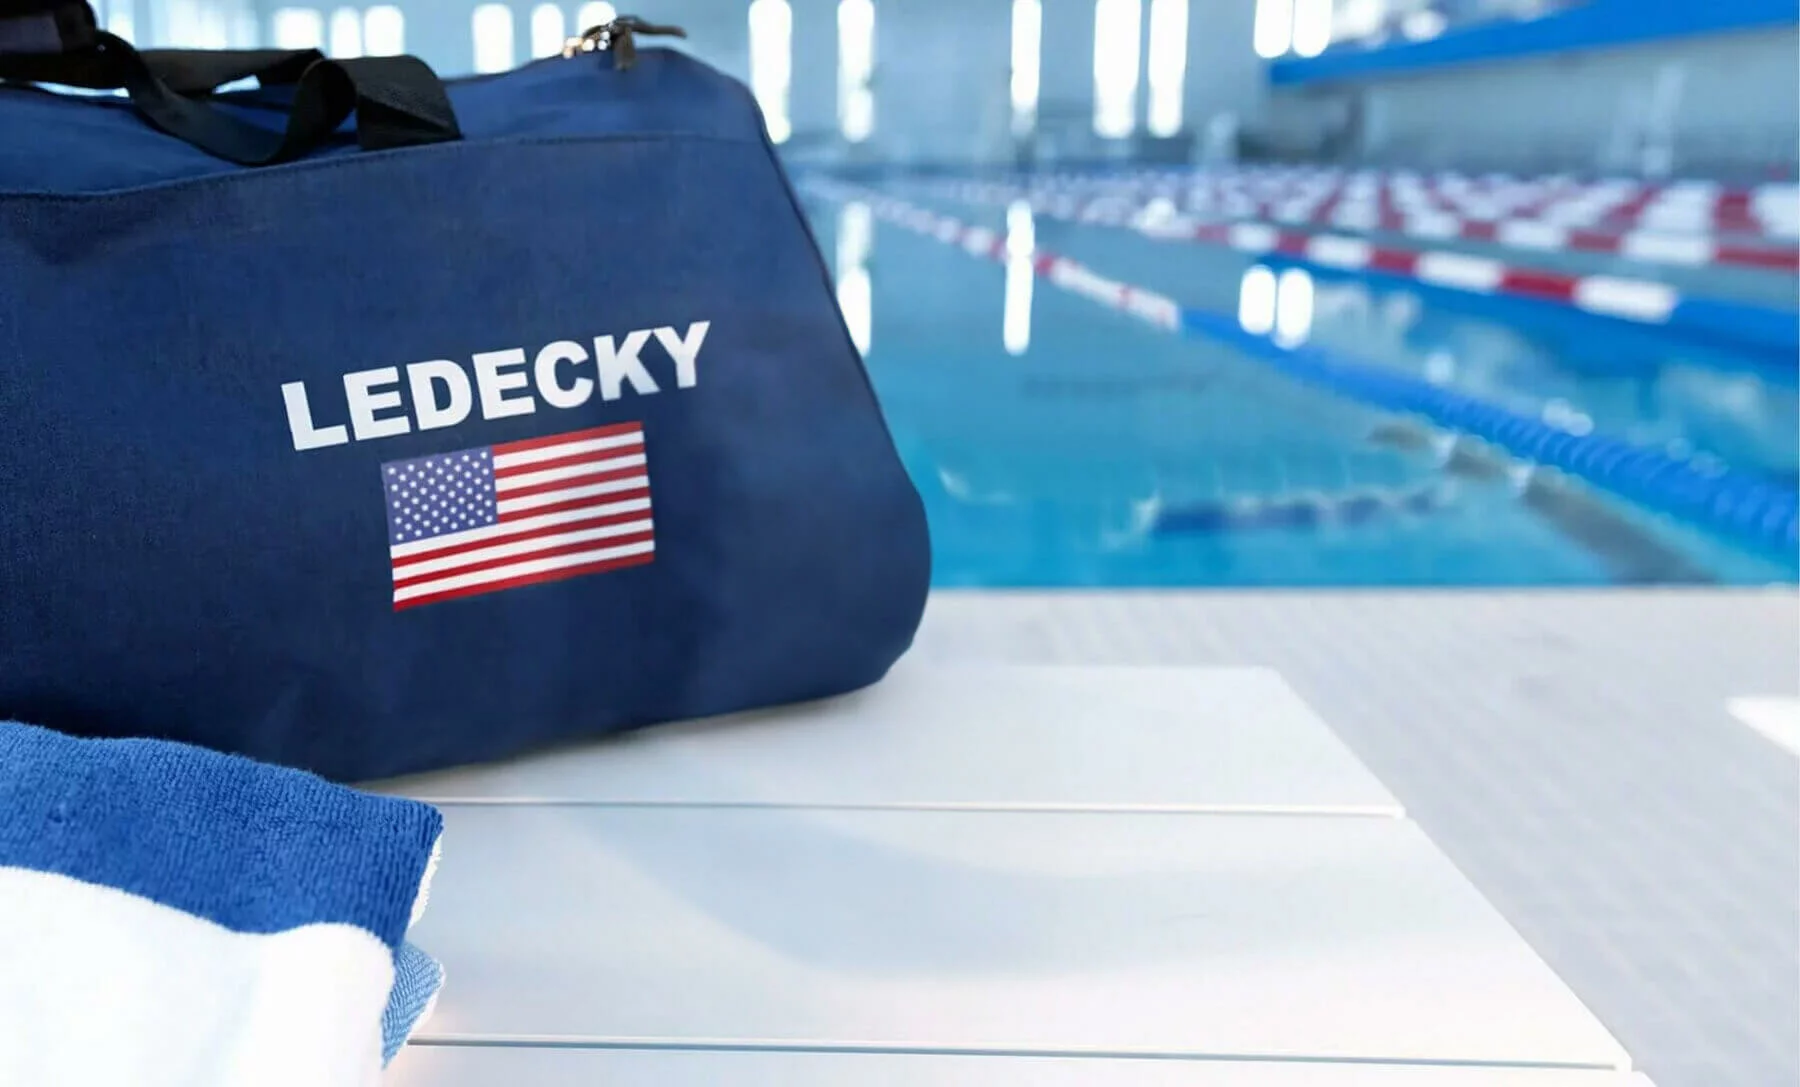 Ledecky rise to a new level of recovery